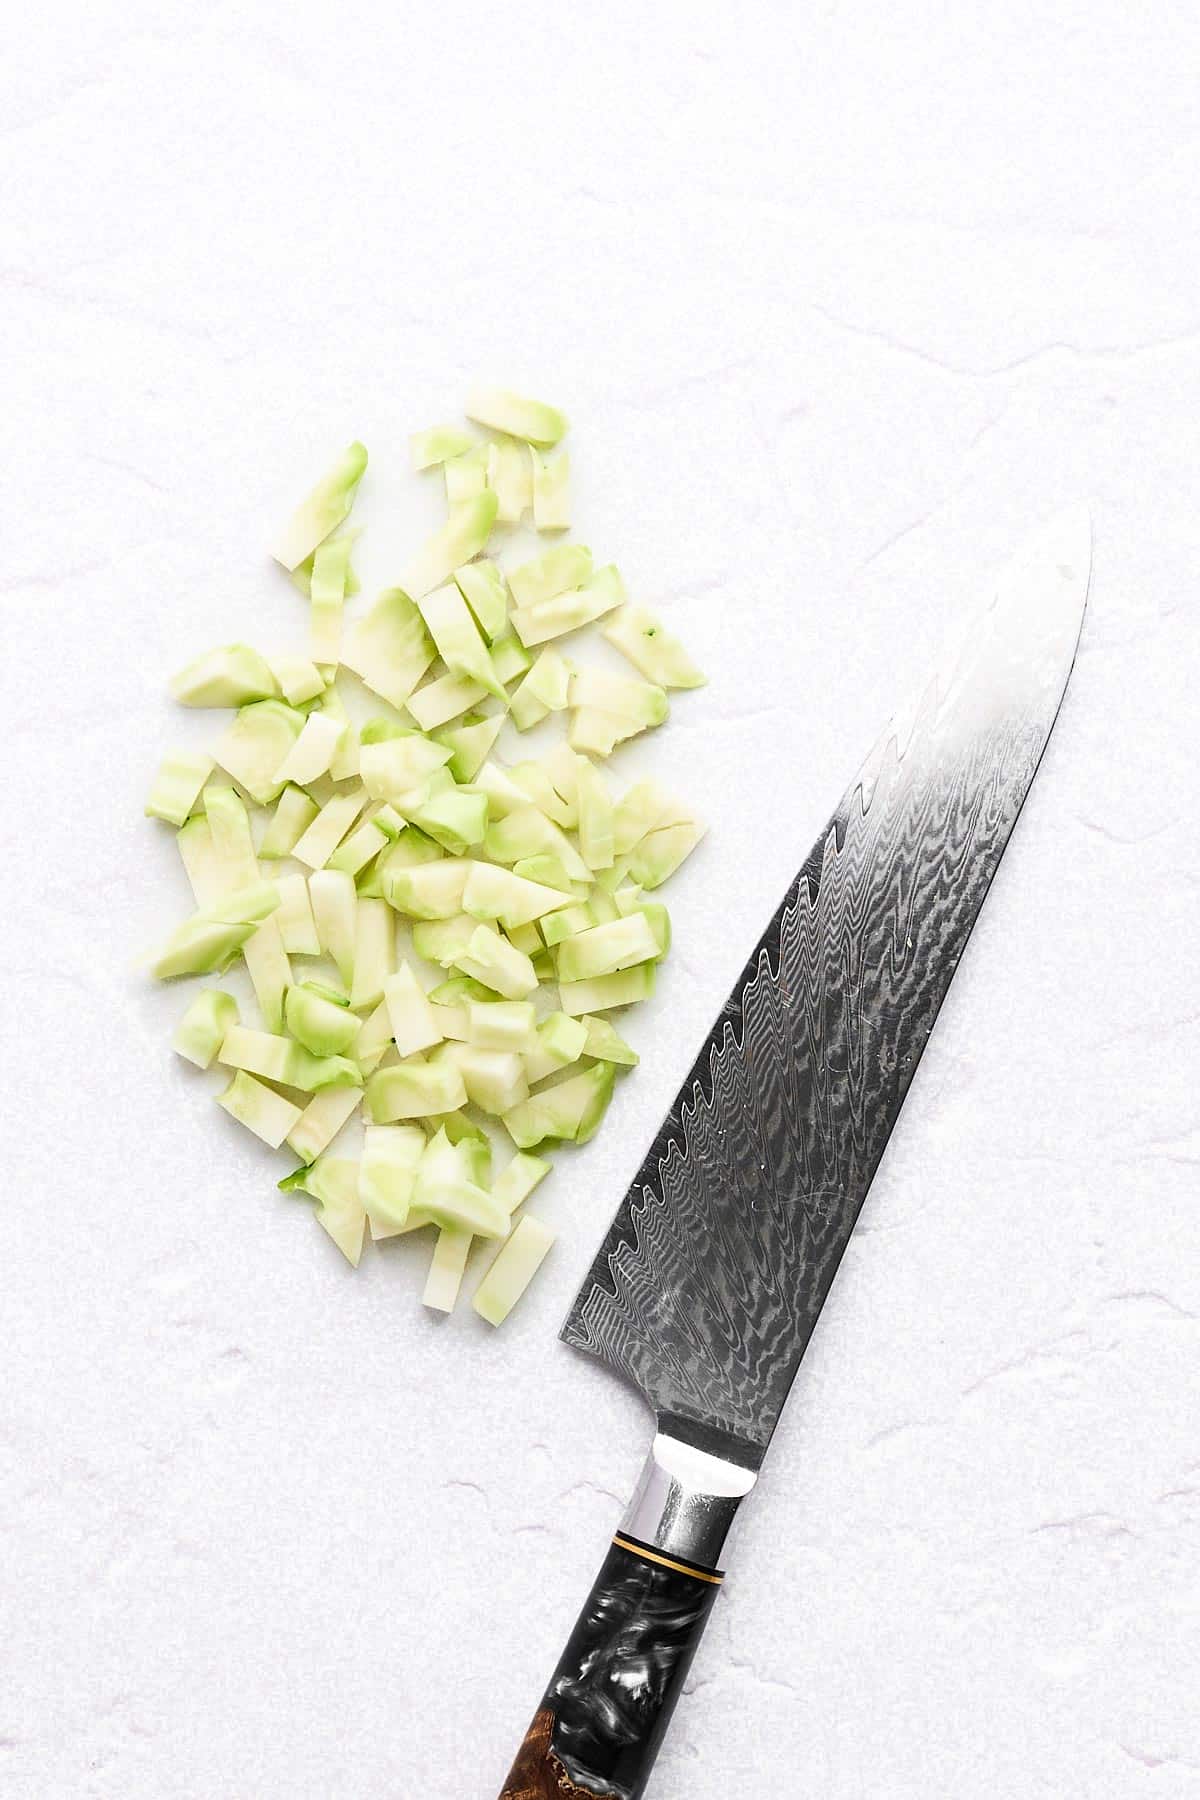 Diced broccoli stems and a chef's knife.